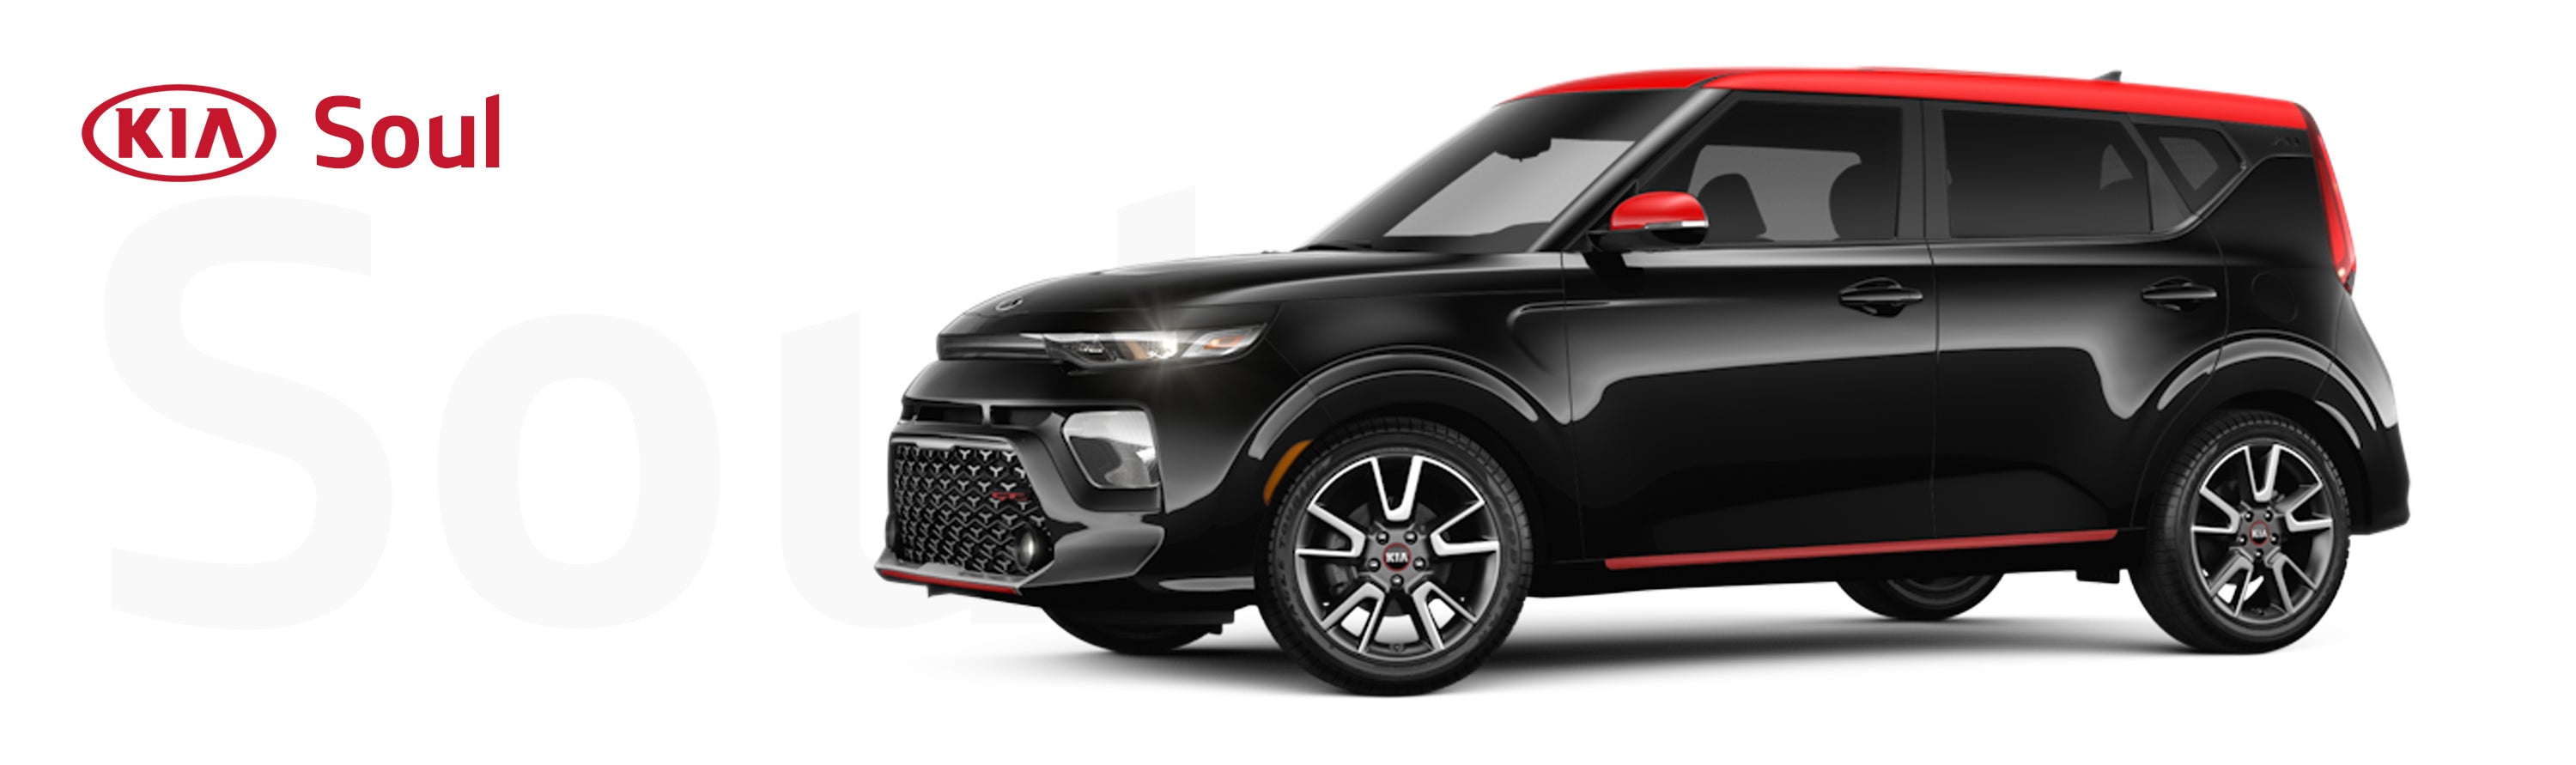 2020 Kia Soul at Clay Cooley Kia Irving in Irving TX